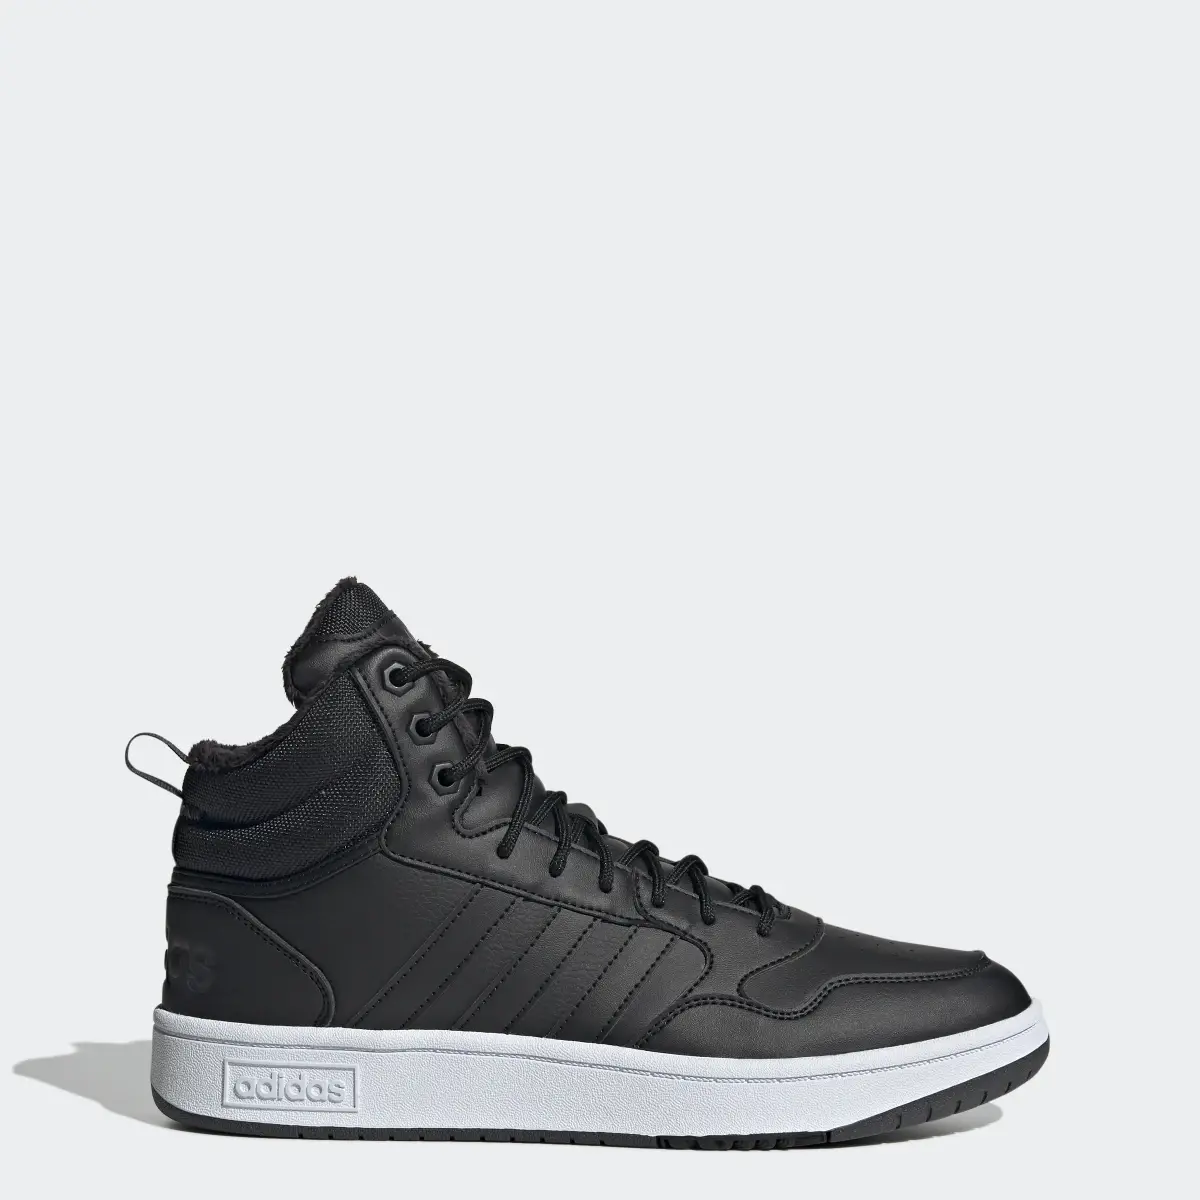 Adidas Chaussure Hoops 3.0 Mid Lifestyle Basketball Classic Fur Lining Winterized. 1